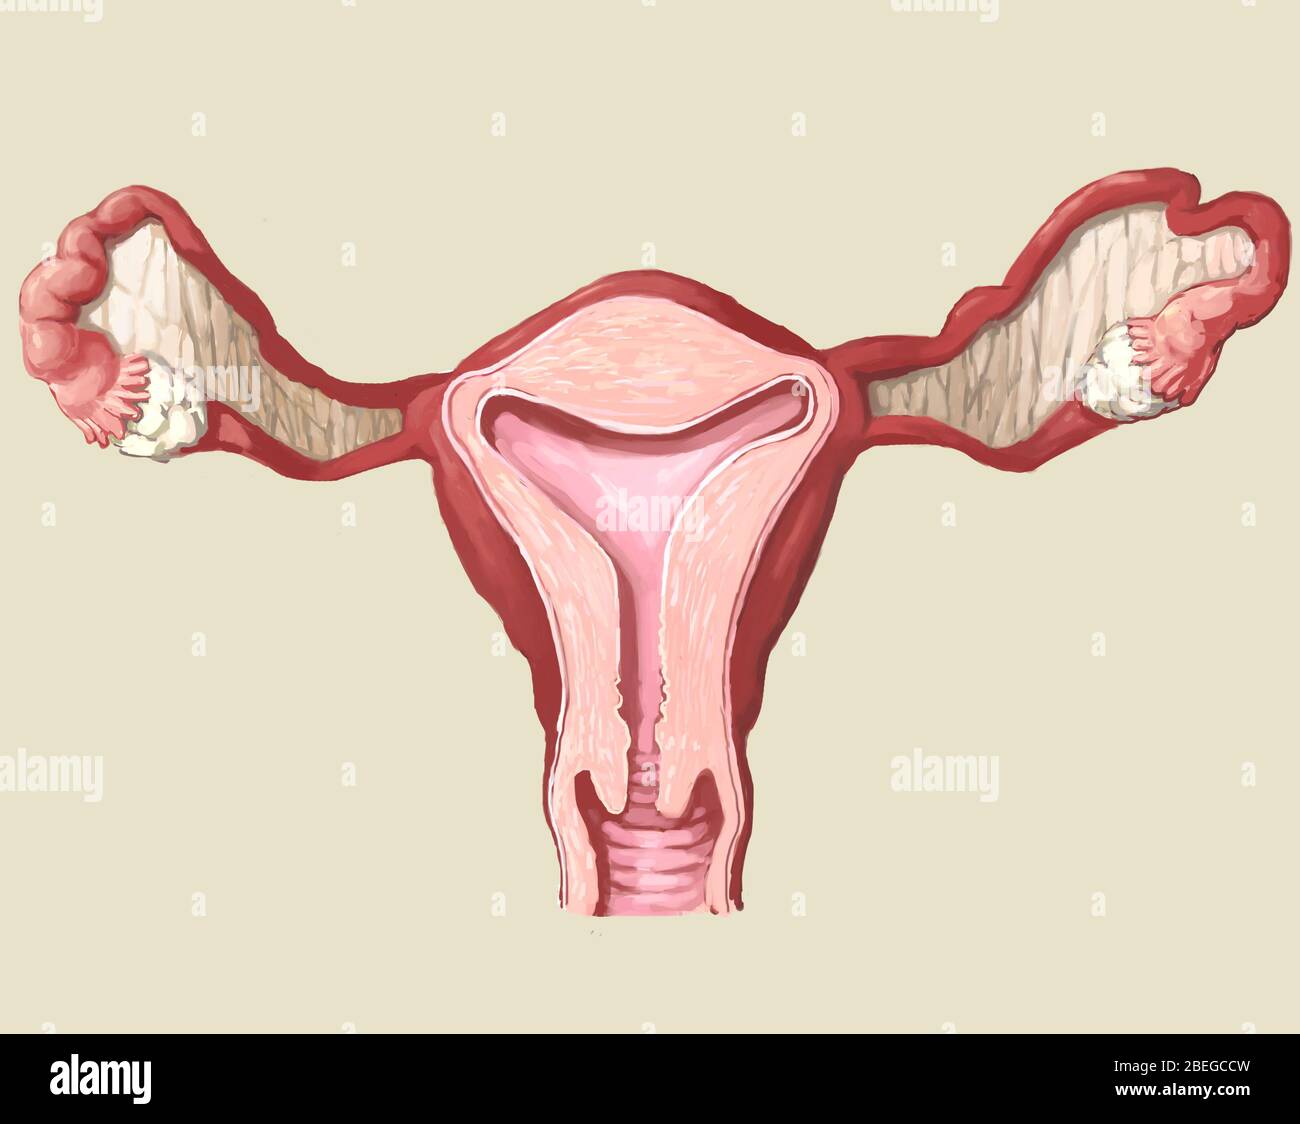 Uterus Cross Section High Resolution Stock Photography And Images Alamy